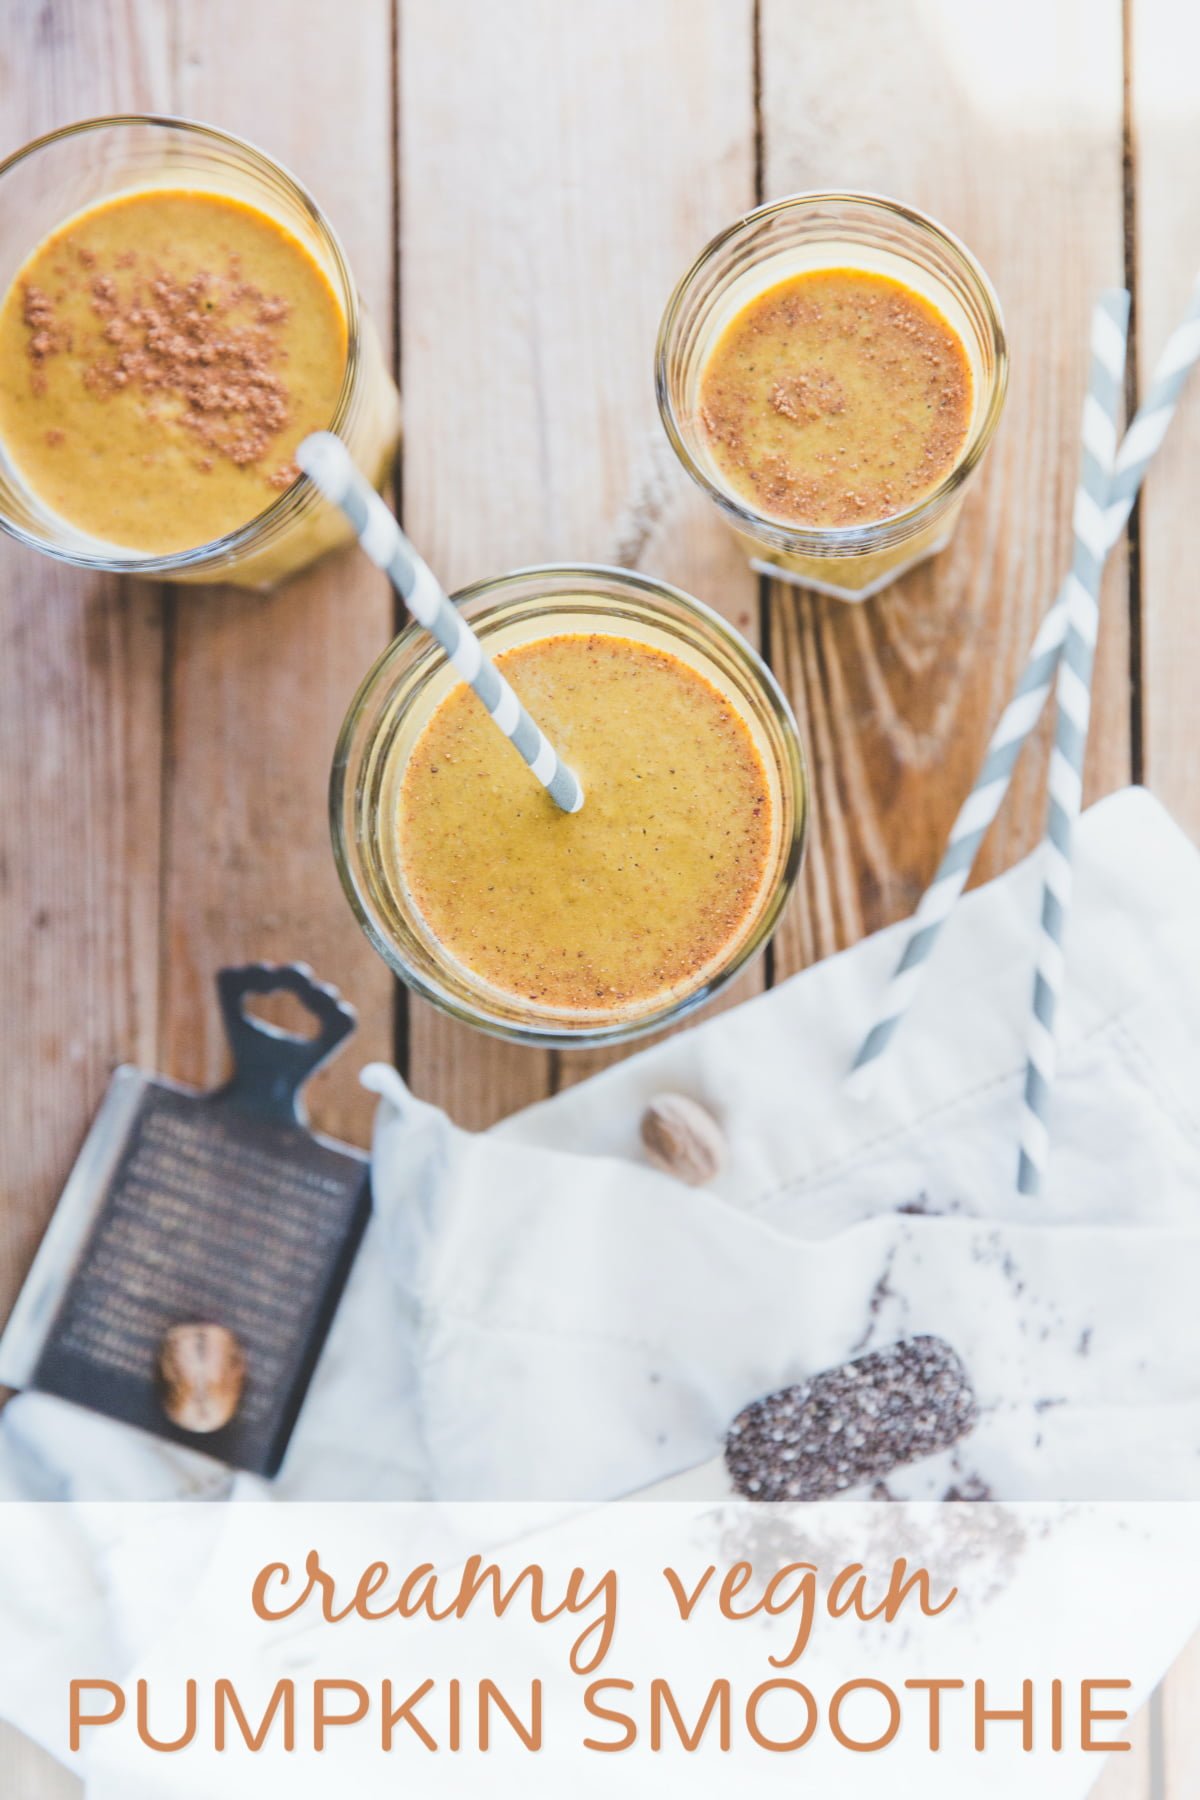 Three glasses of vegan pumpkin smoothies with striped paper straws